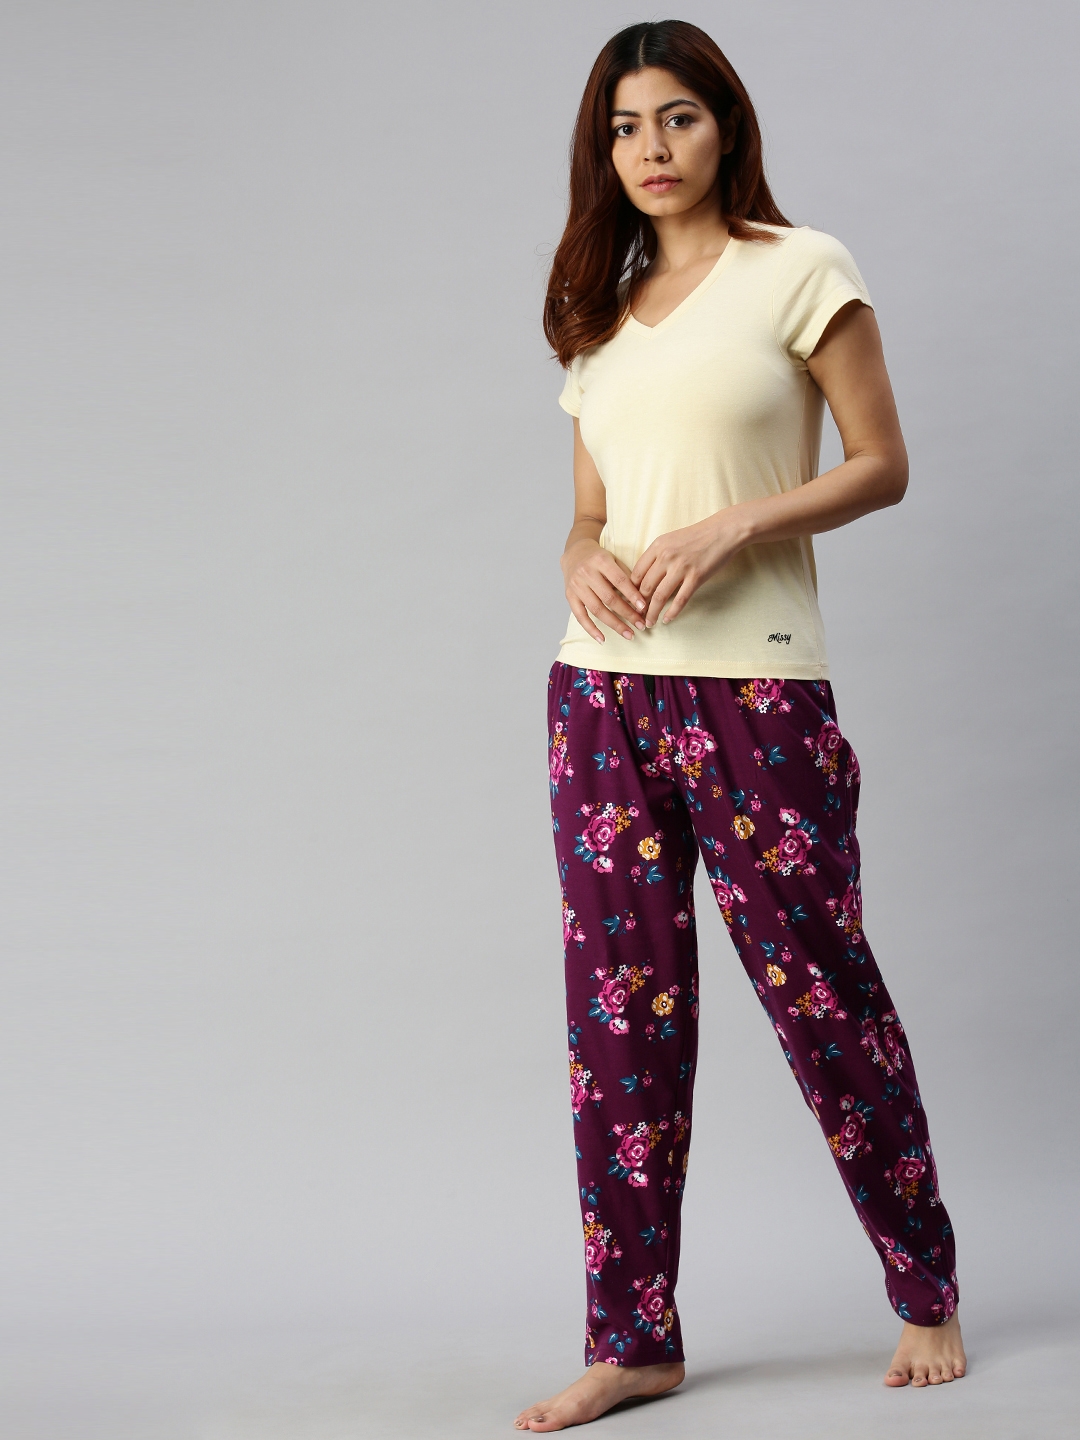 Kryptic | Kryptic Womens 100% Cotton Full Length Lounge Pants - Pack of 2 6